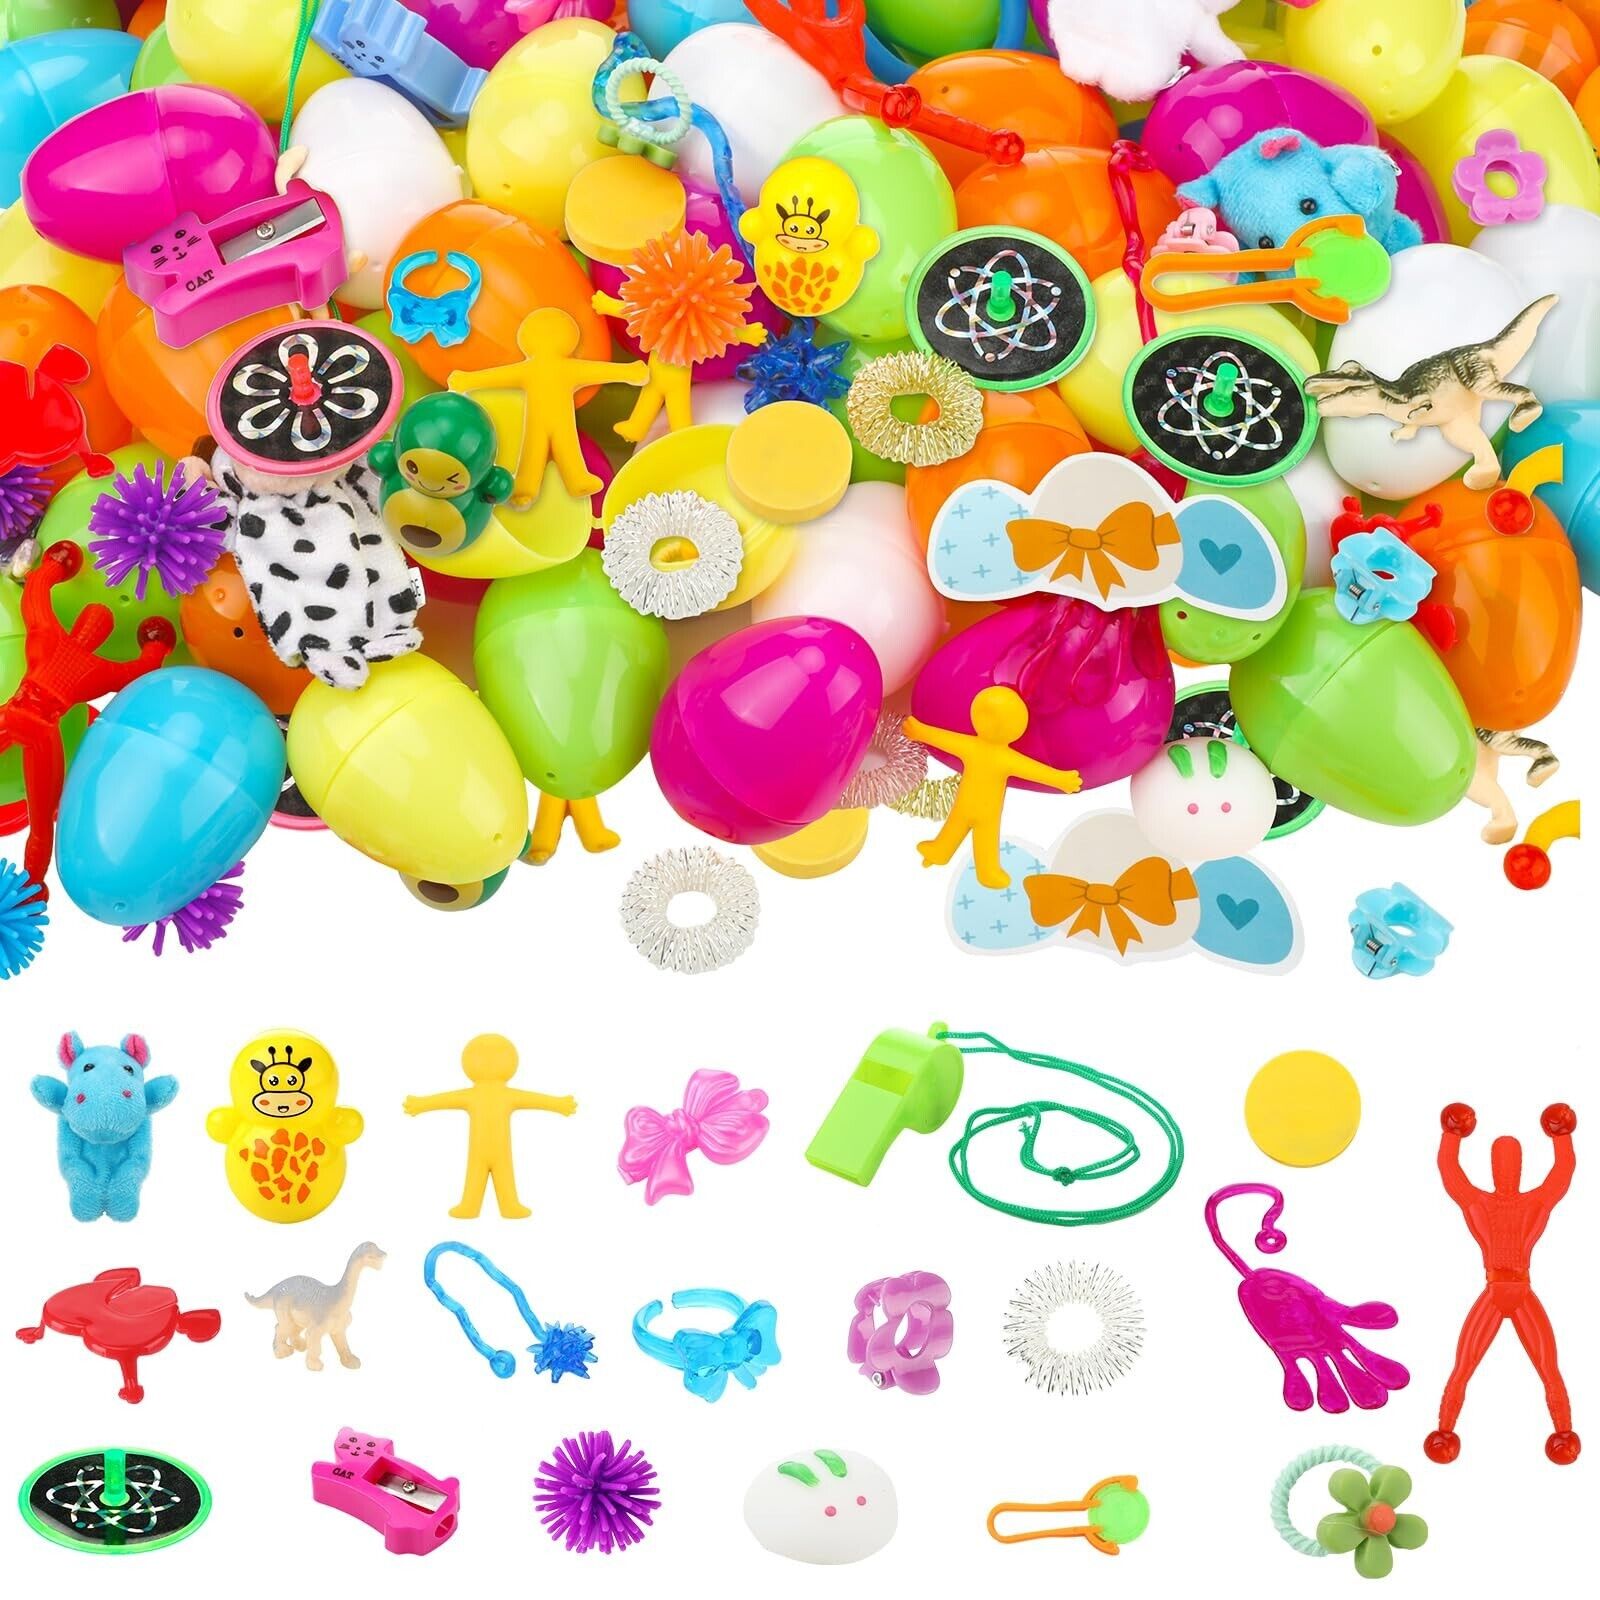 Woanger 800 Pcs Easter Eggs with Toys Inside Pre Filled Easter Eggs with Asso...